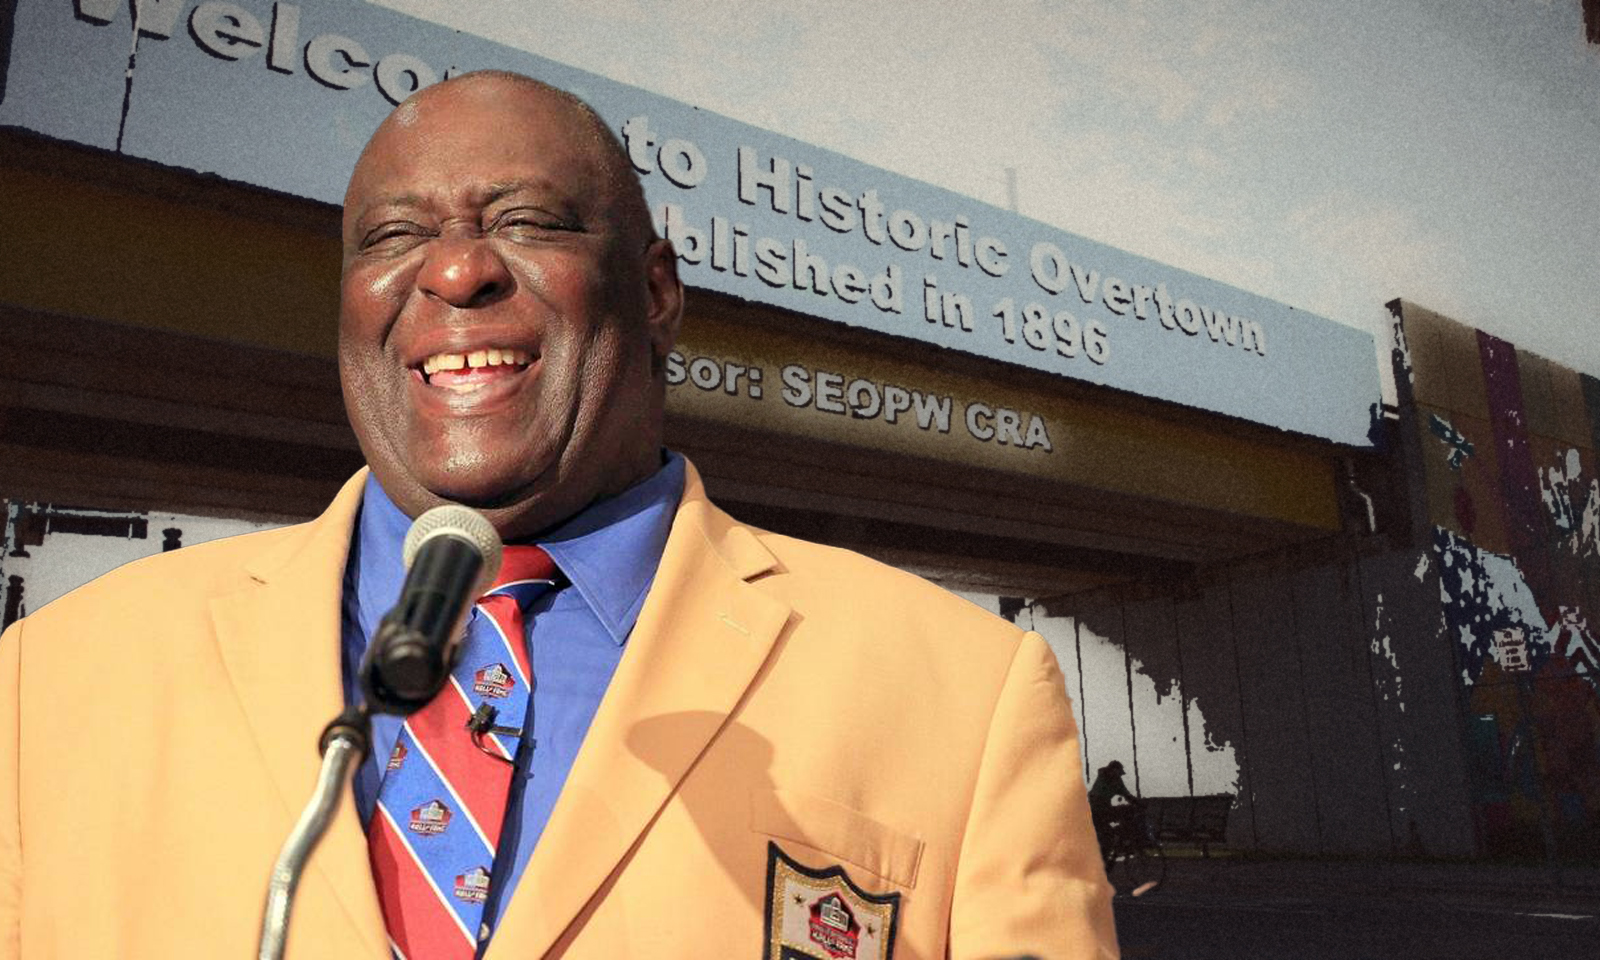 Larry Little gets street named after him in Overtown